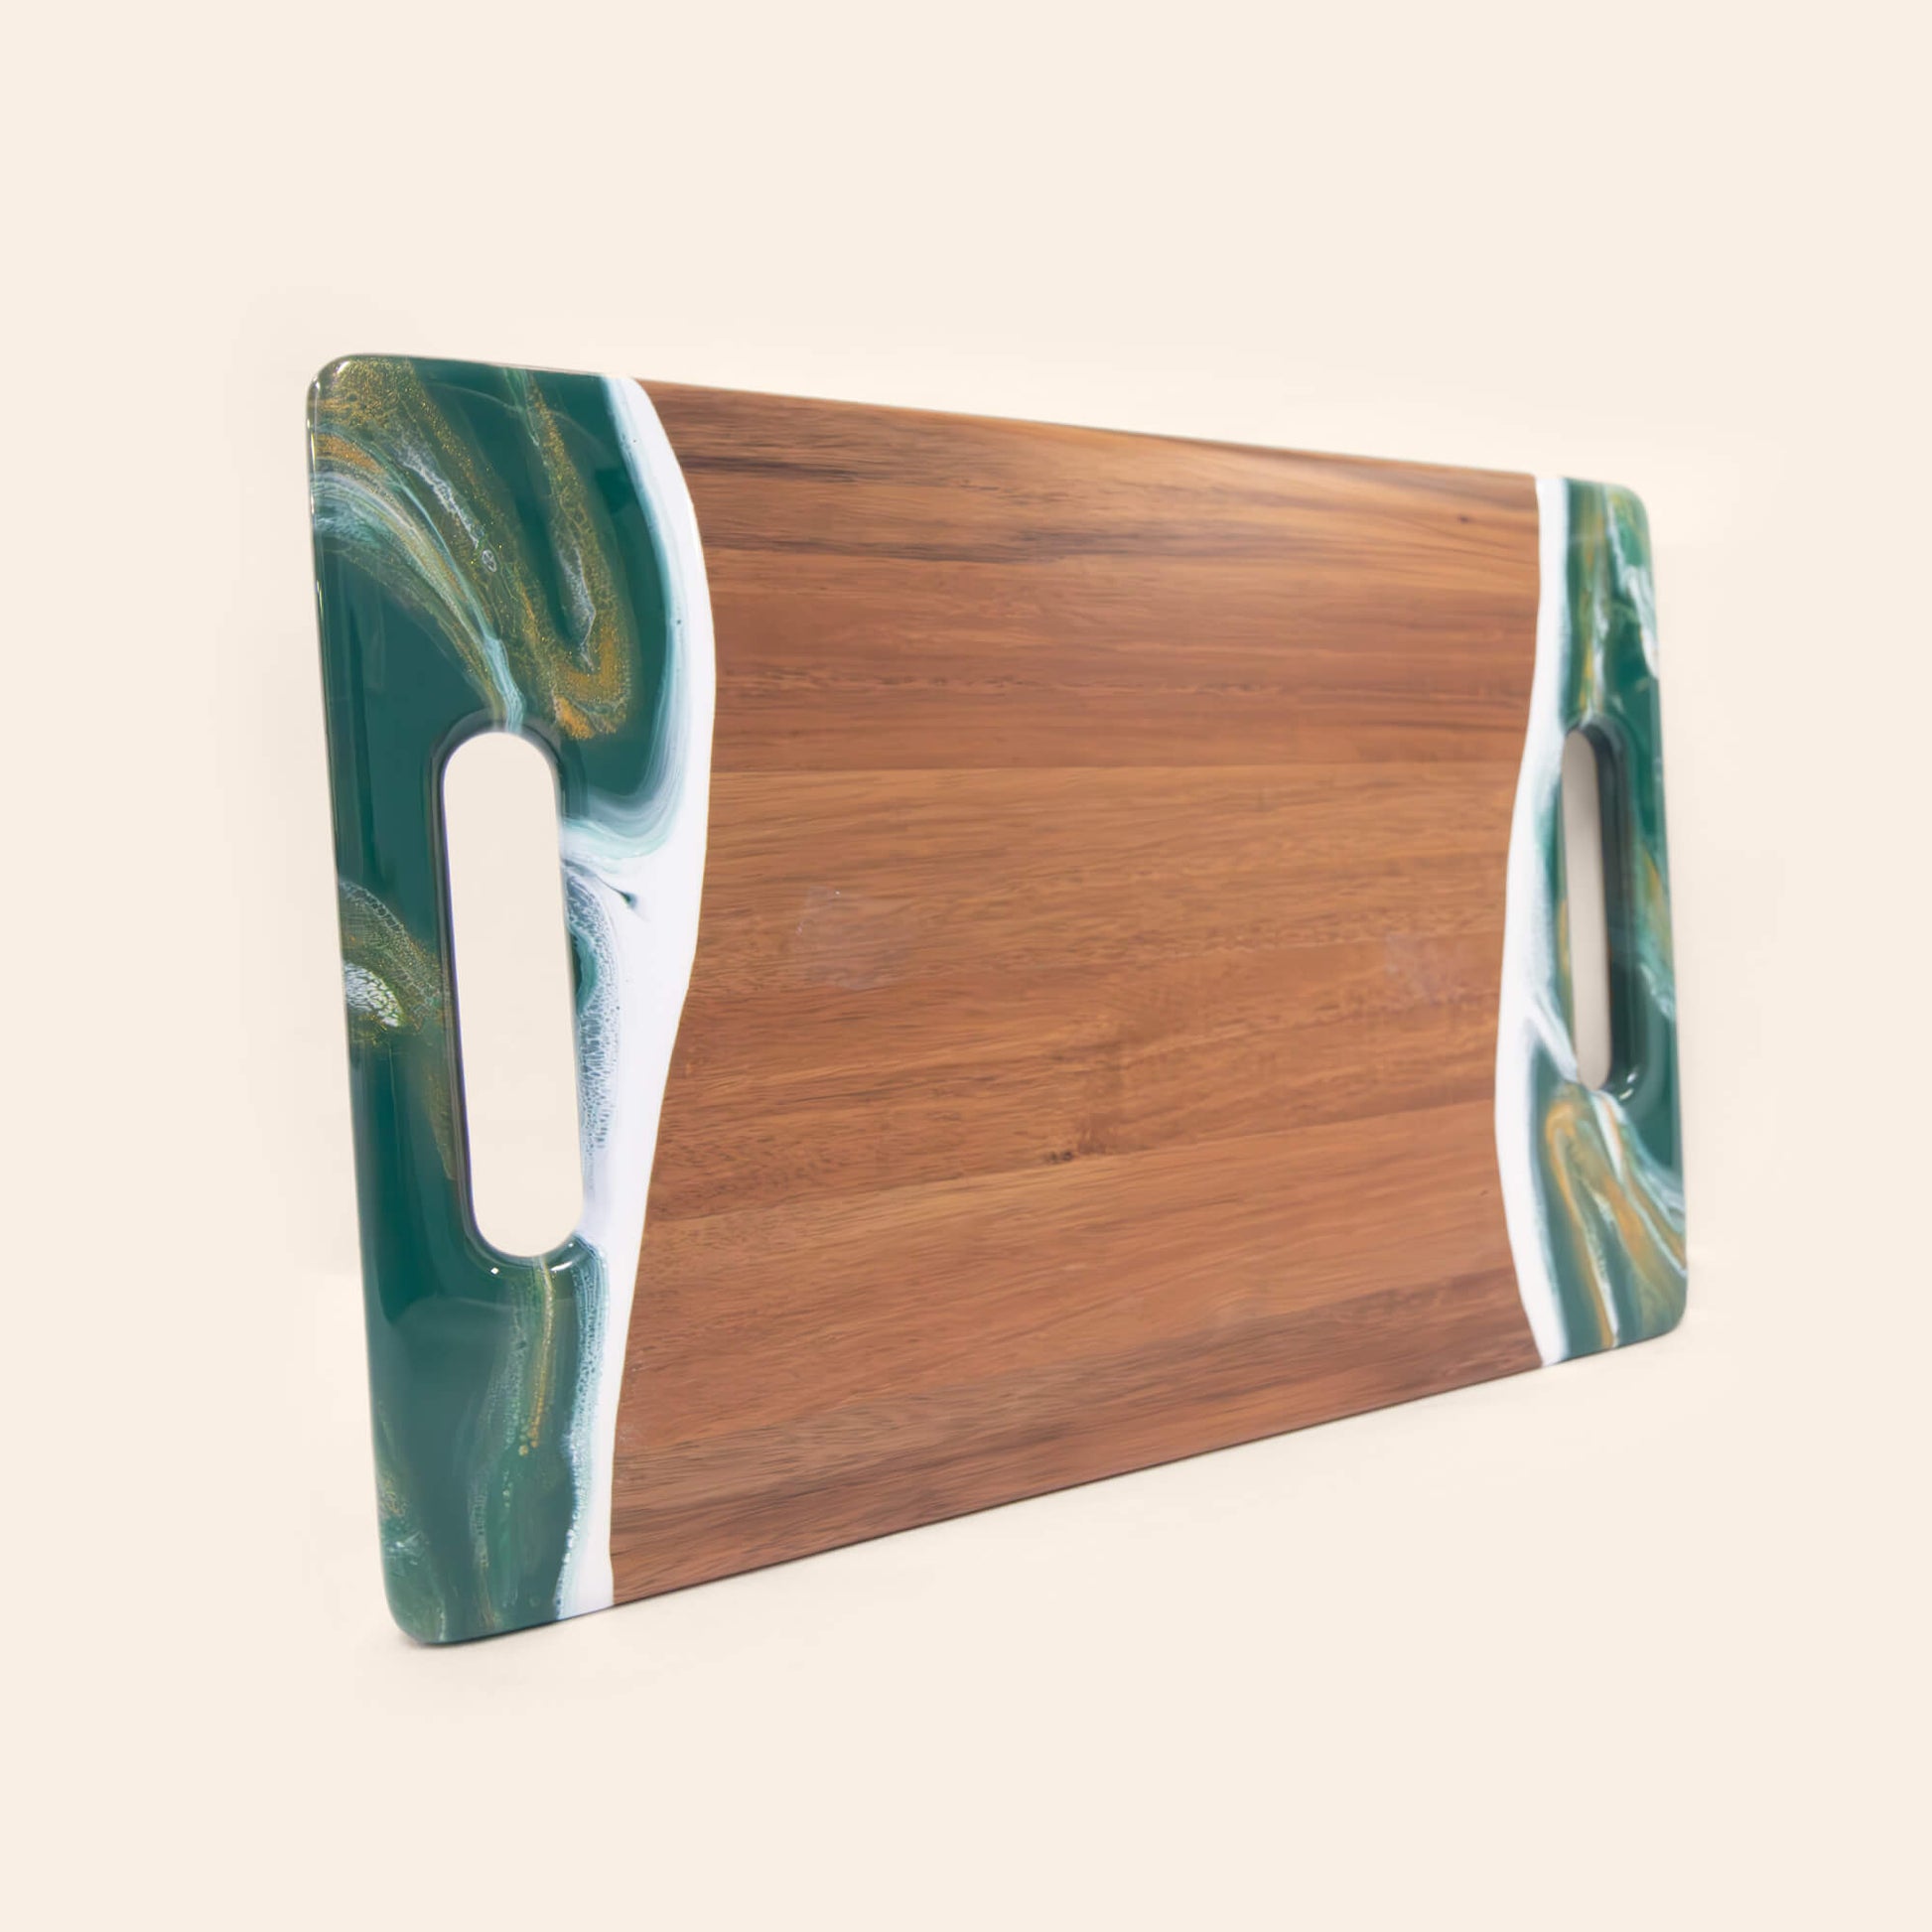 SKY LIGHT Wood Cutting Boards, Kitchen Large Acacia Wooden